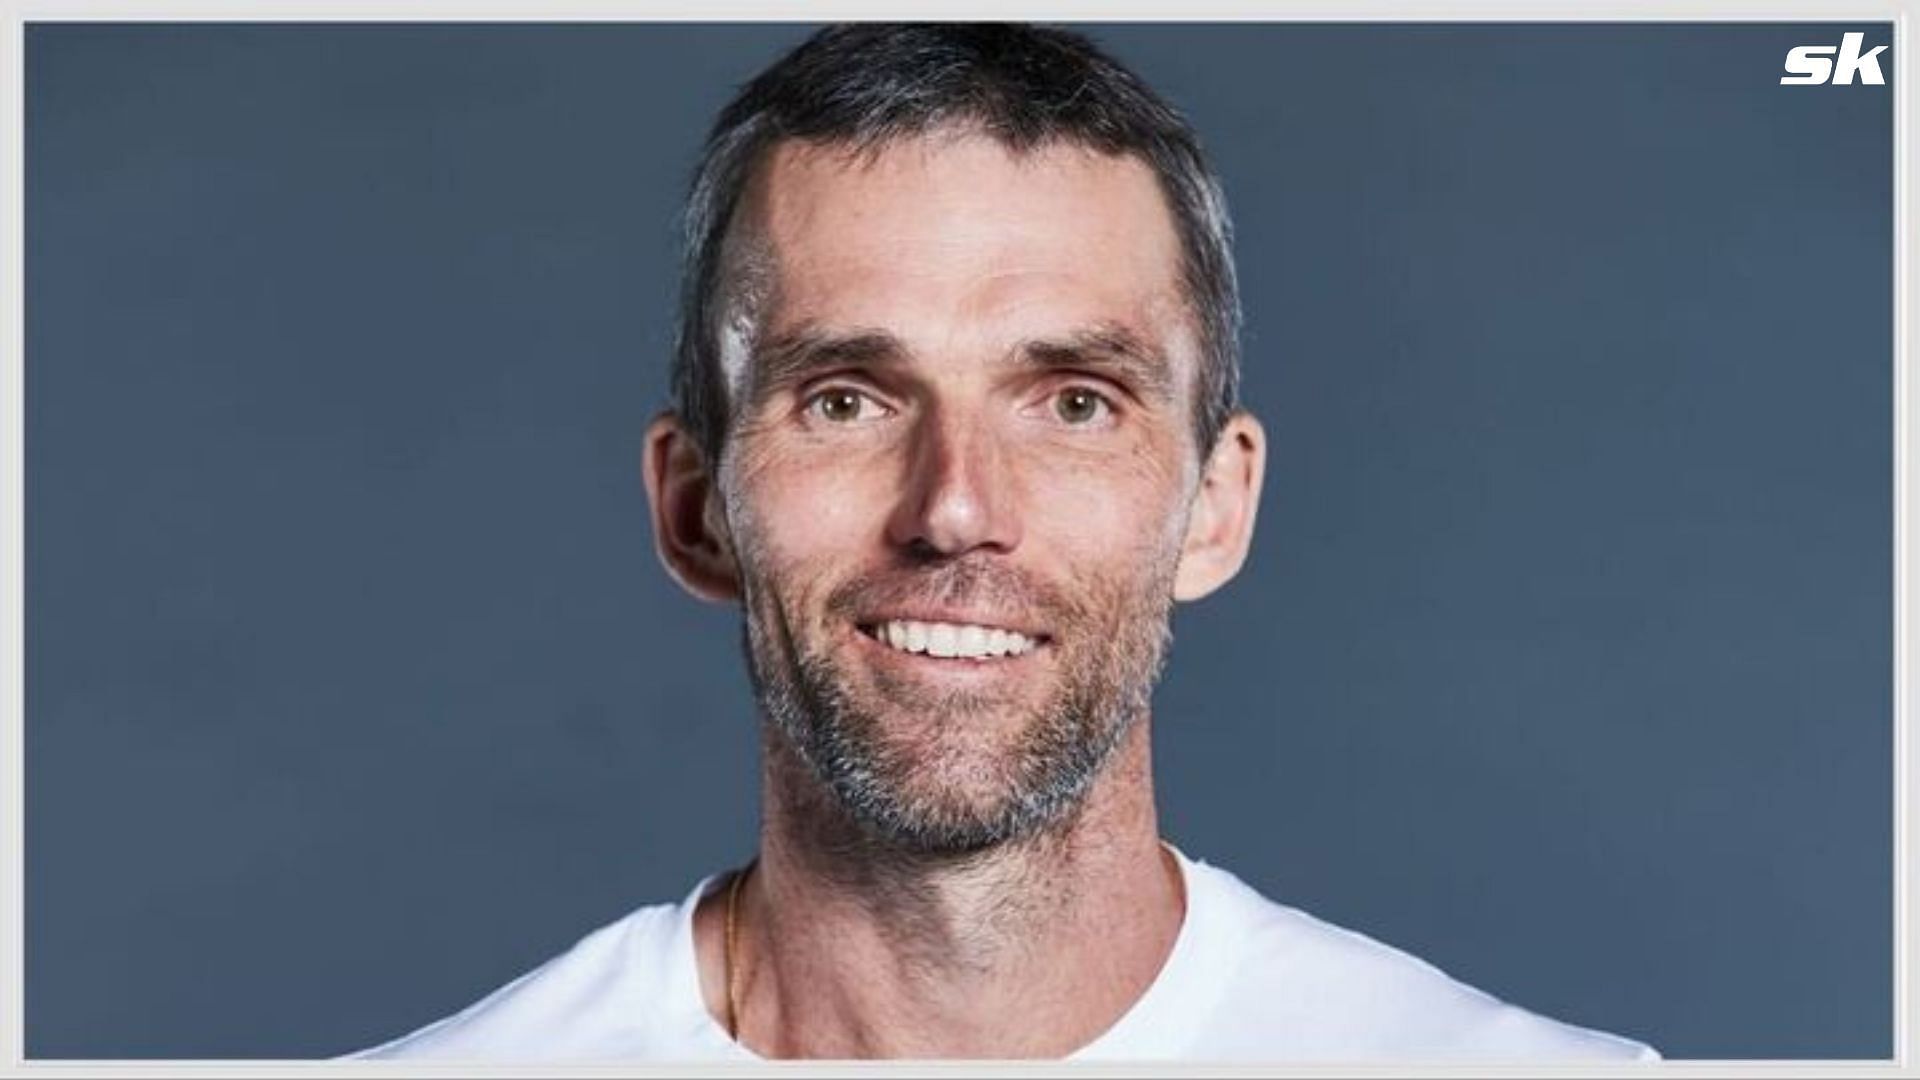 Ivo Karlovic announced his retirement from tennis earlier today